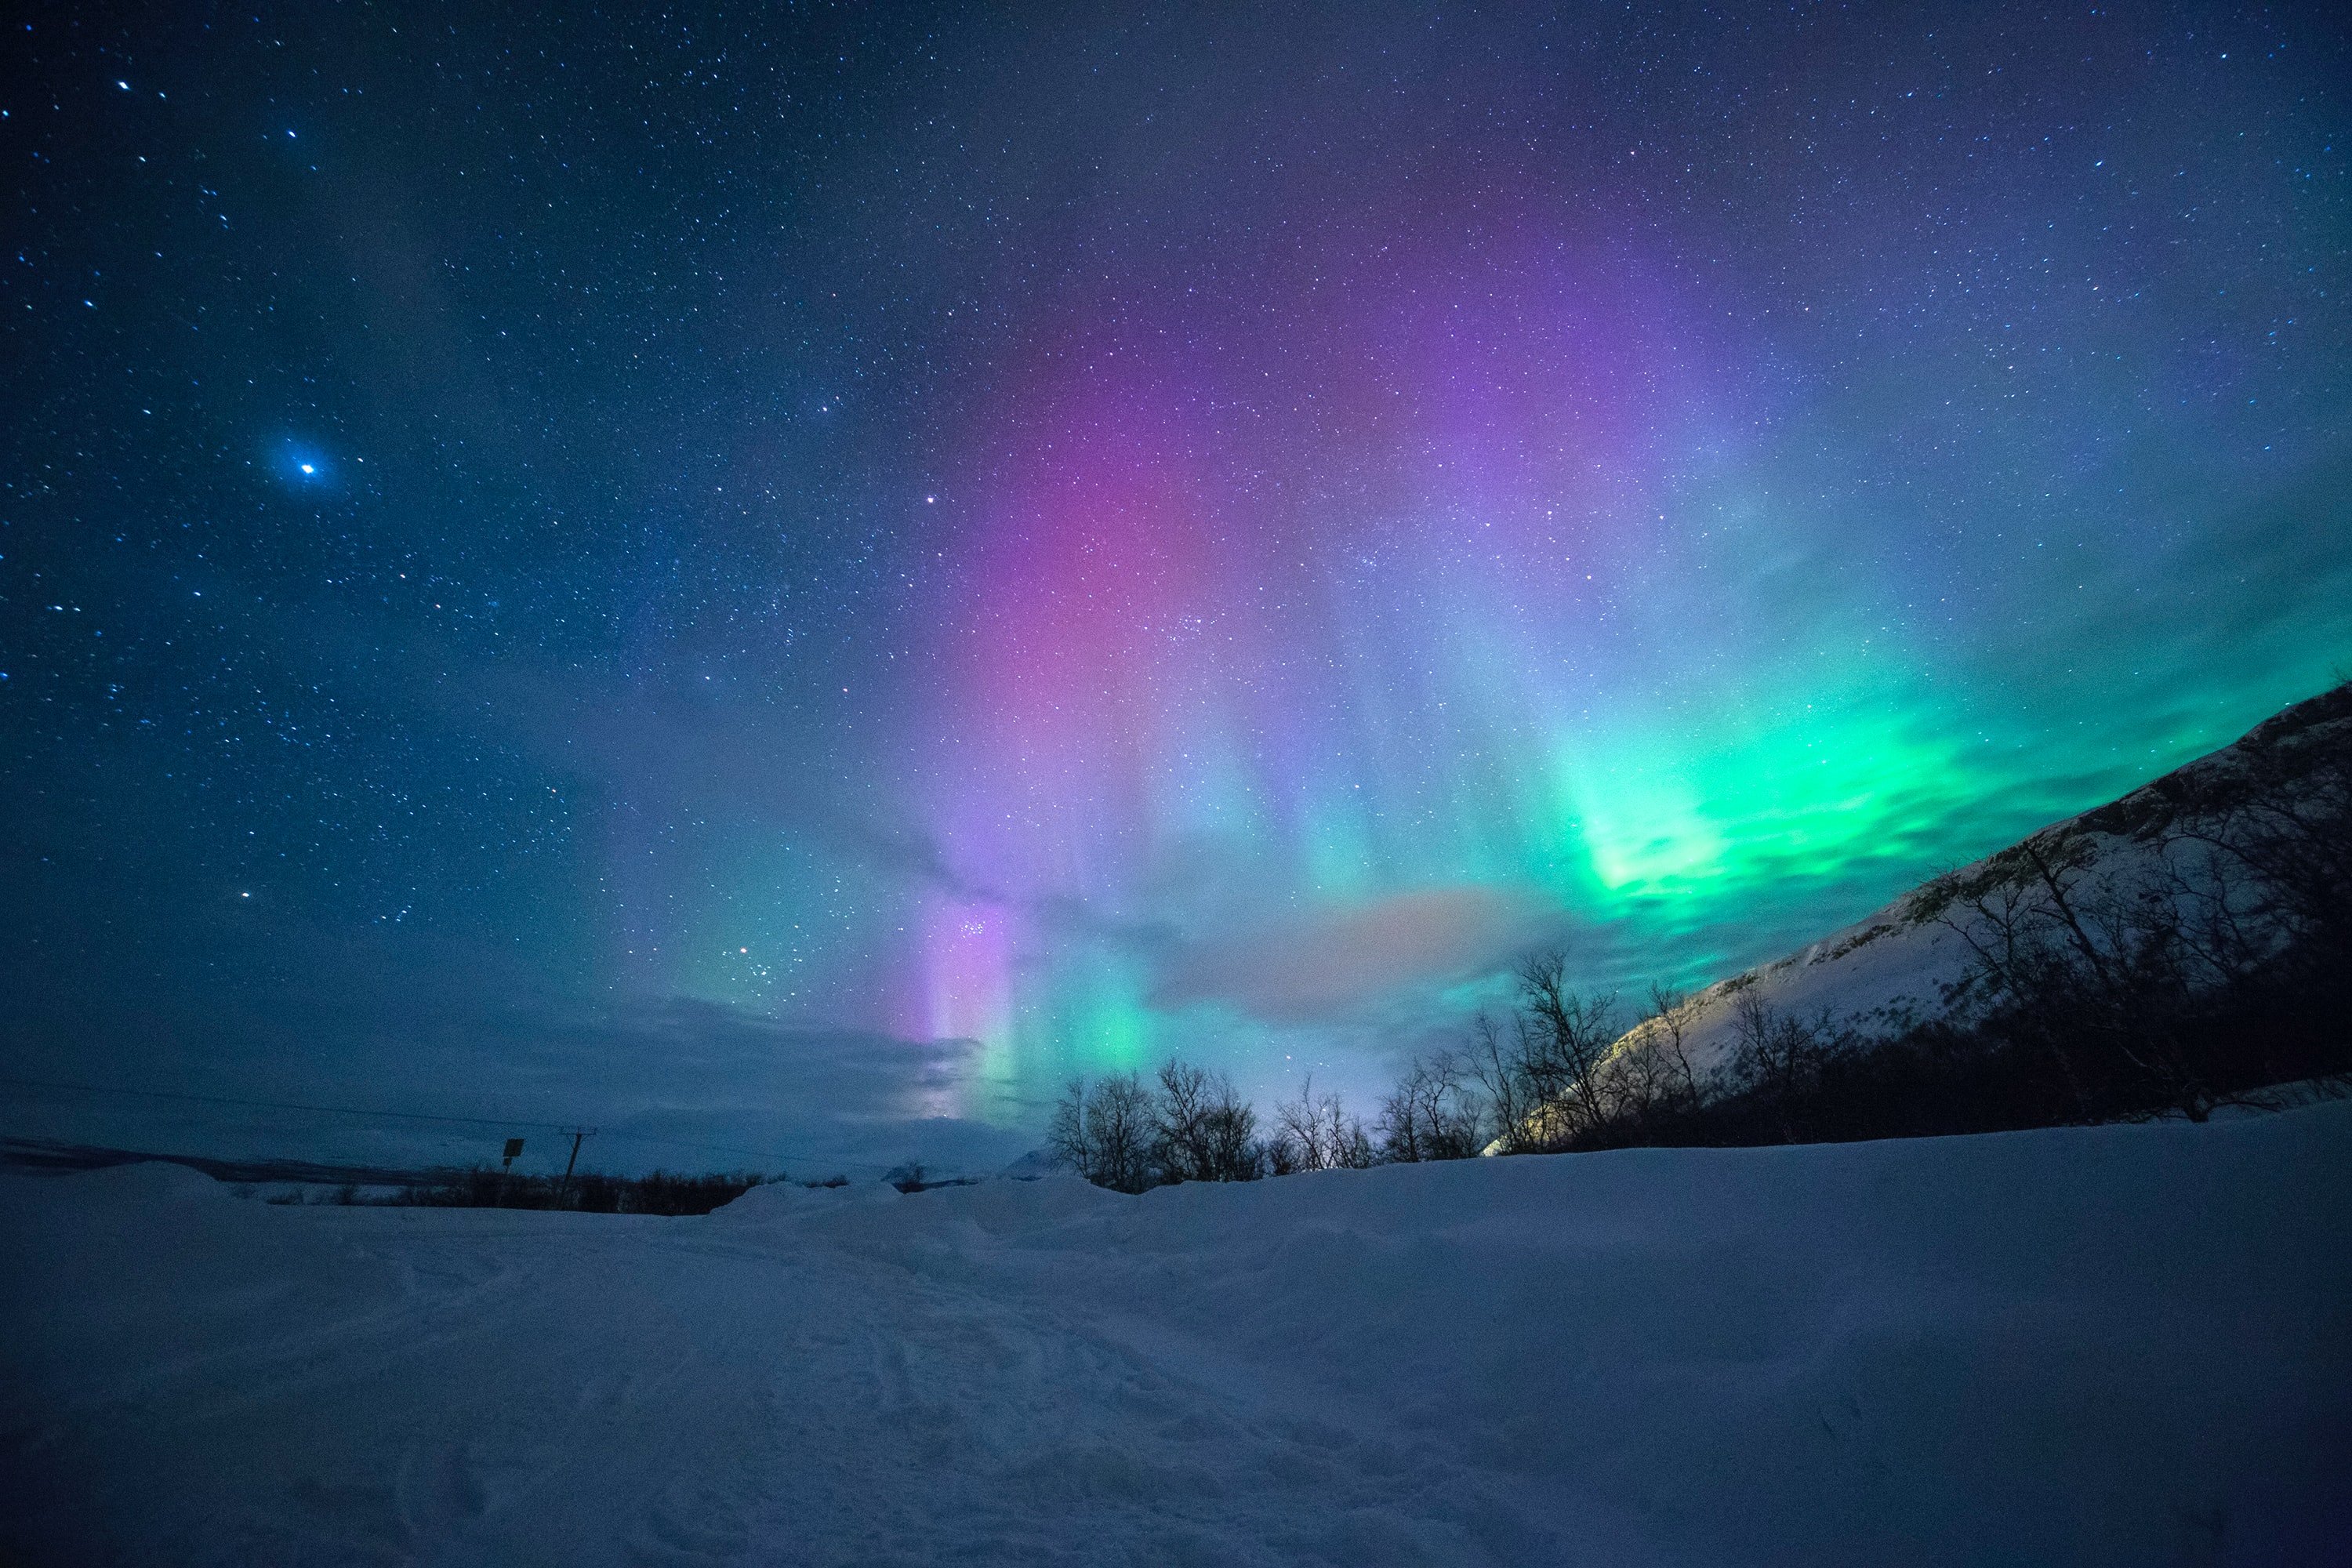 Enjoy the Northern Lights on New Years Eve.